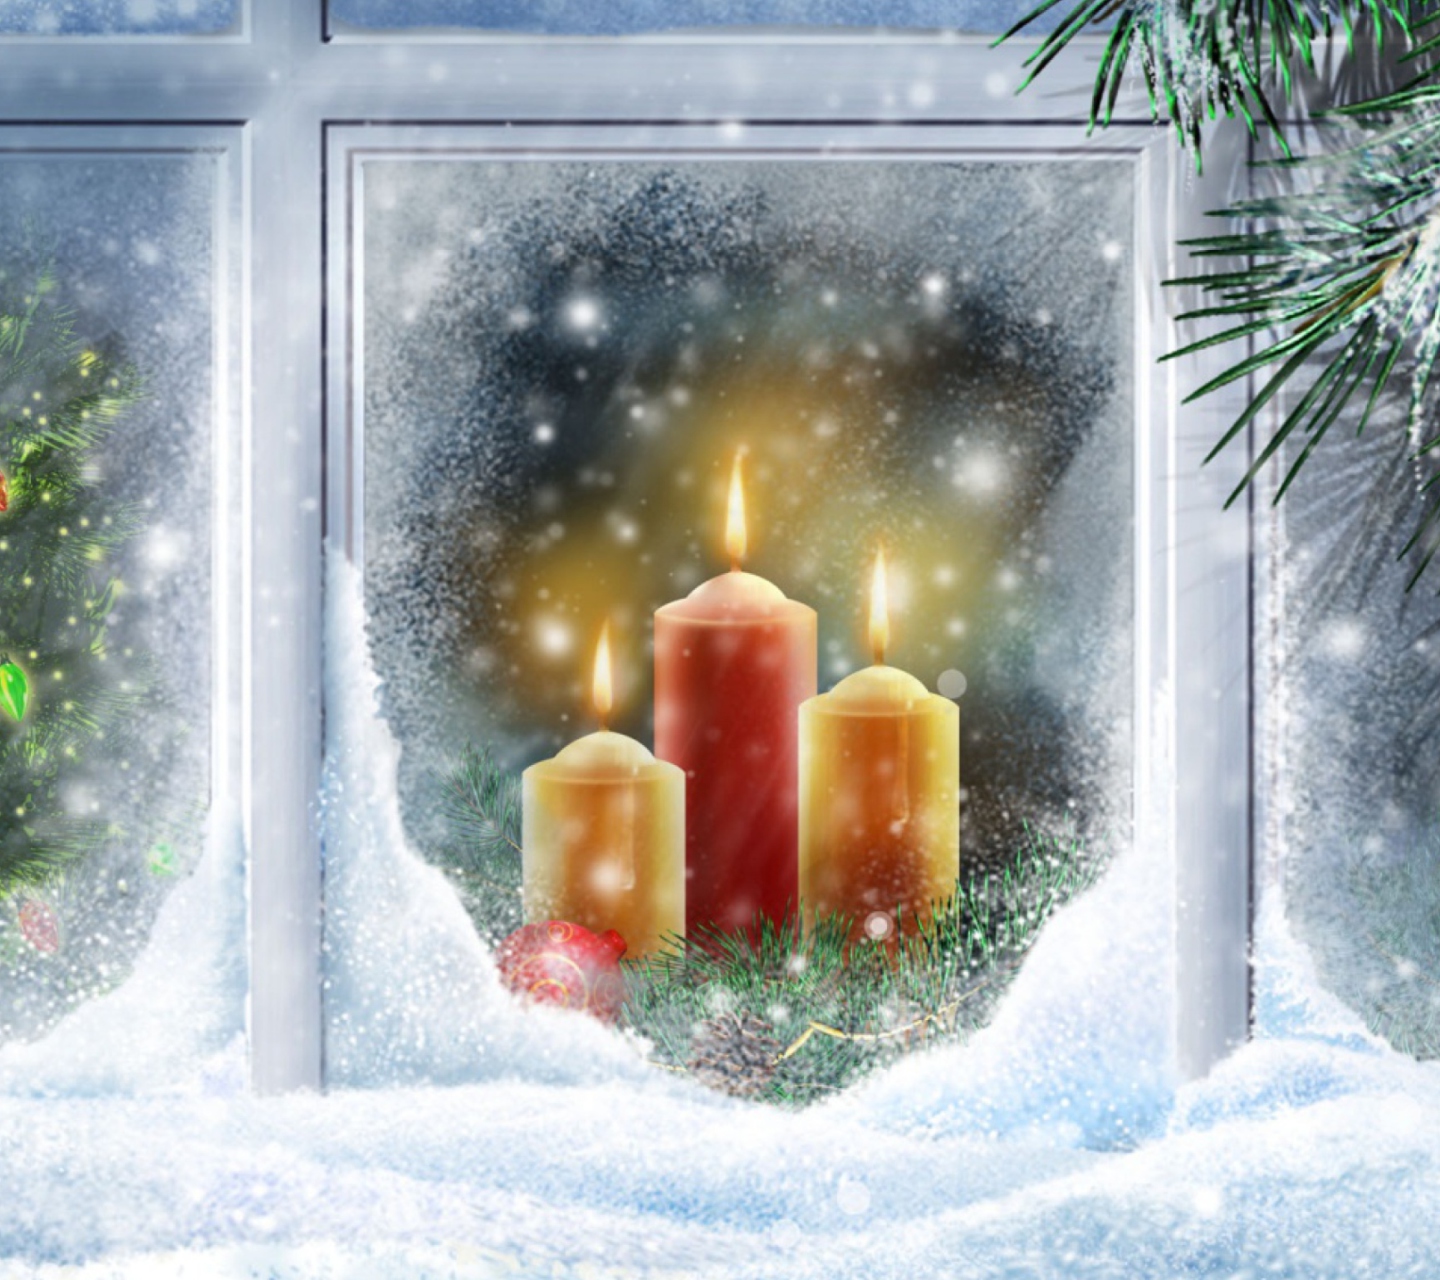 Special Wishes At Christmas wallpaper 1440x1280